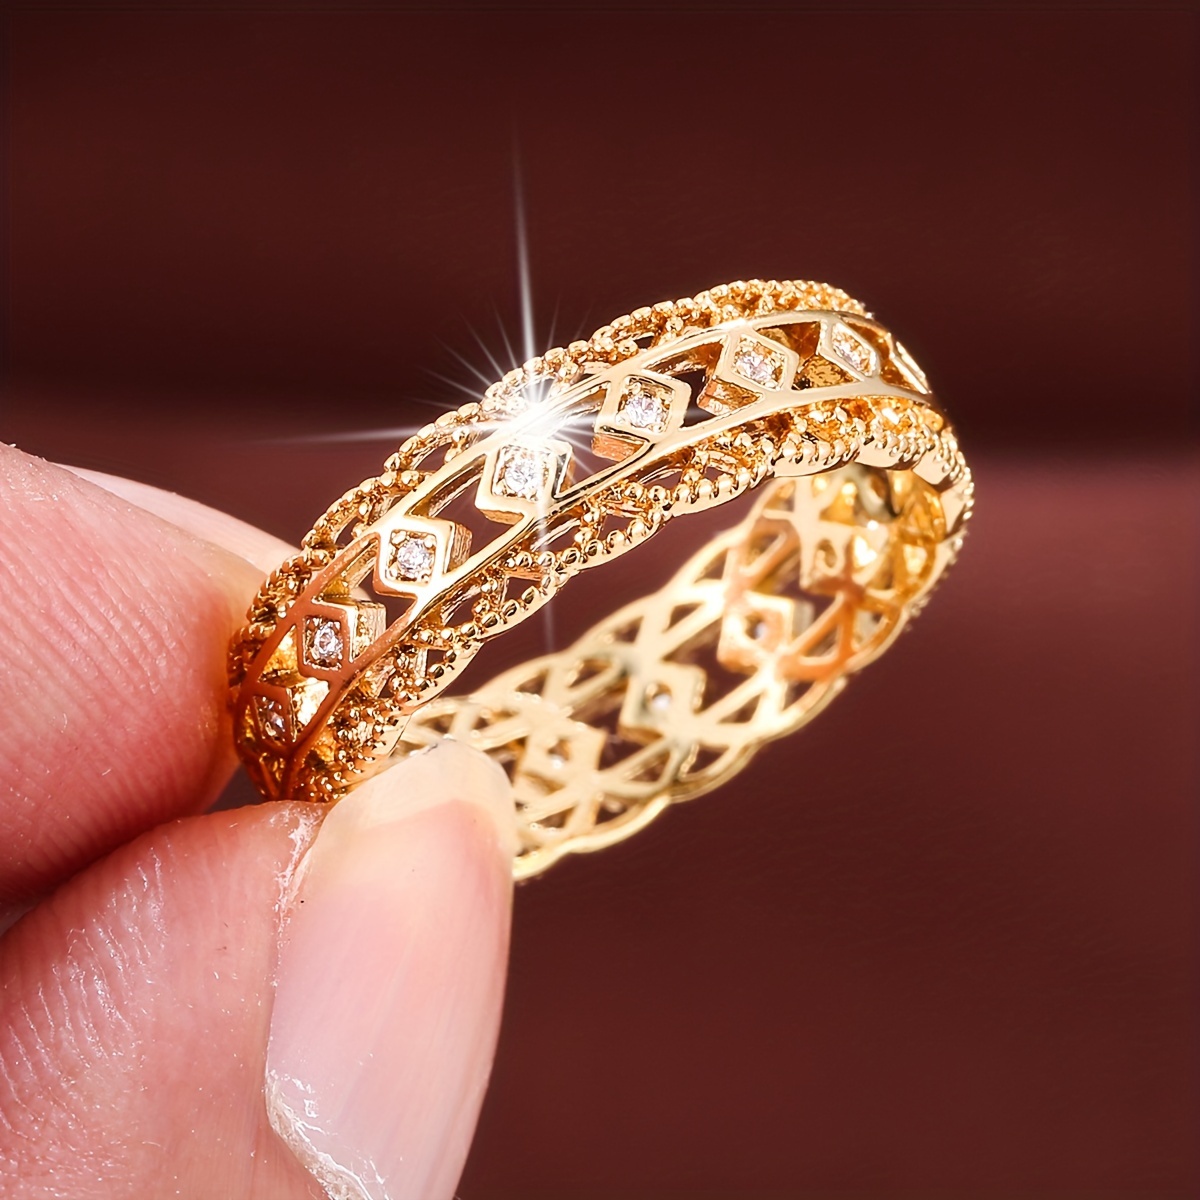 

Chic Band Ring Hollow Design Paved Shining Zirconia Golden Or Silvery Make Your Call Match Daily Outfits Party Accessory